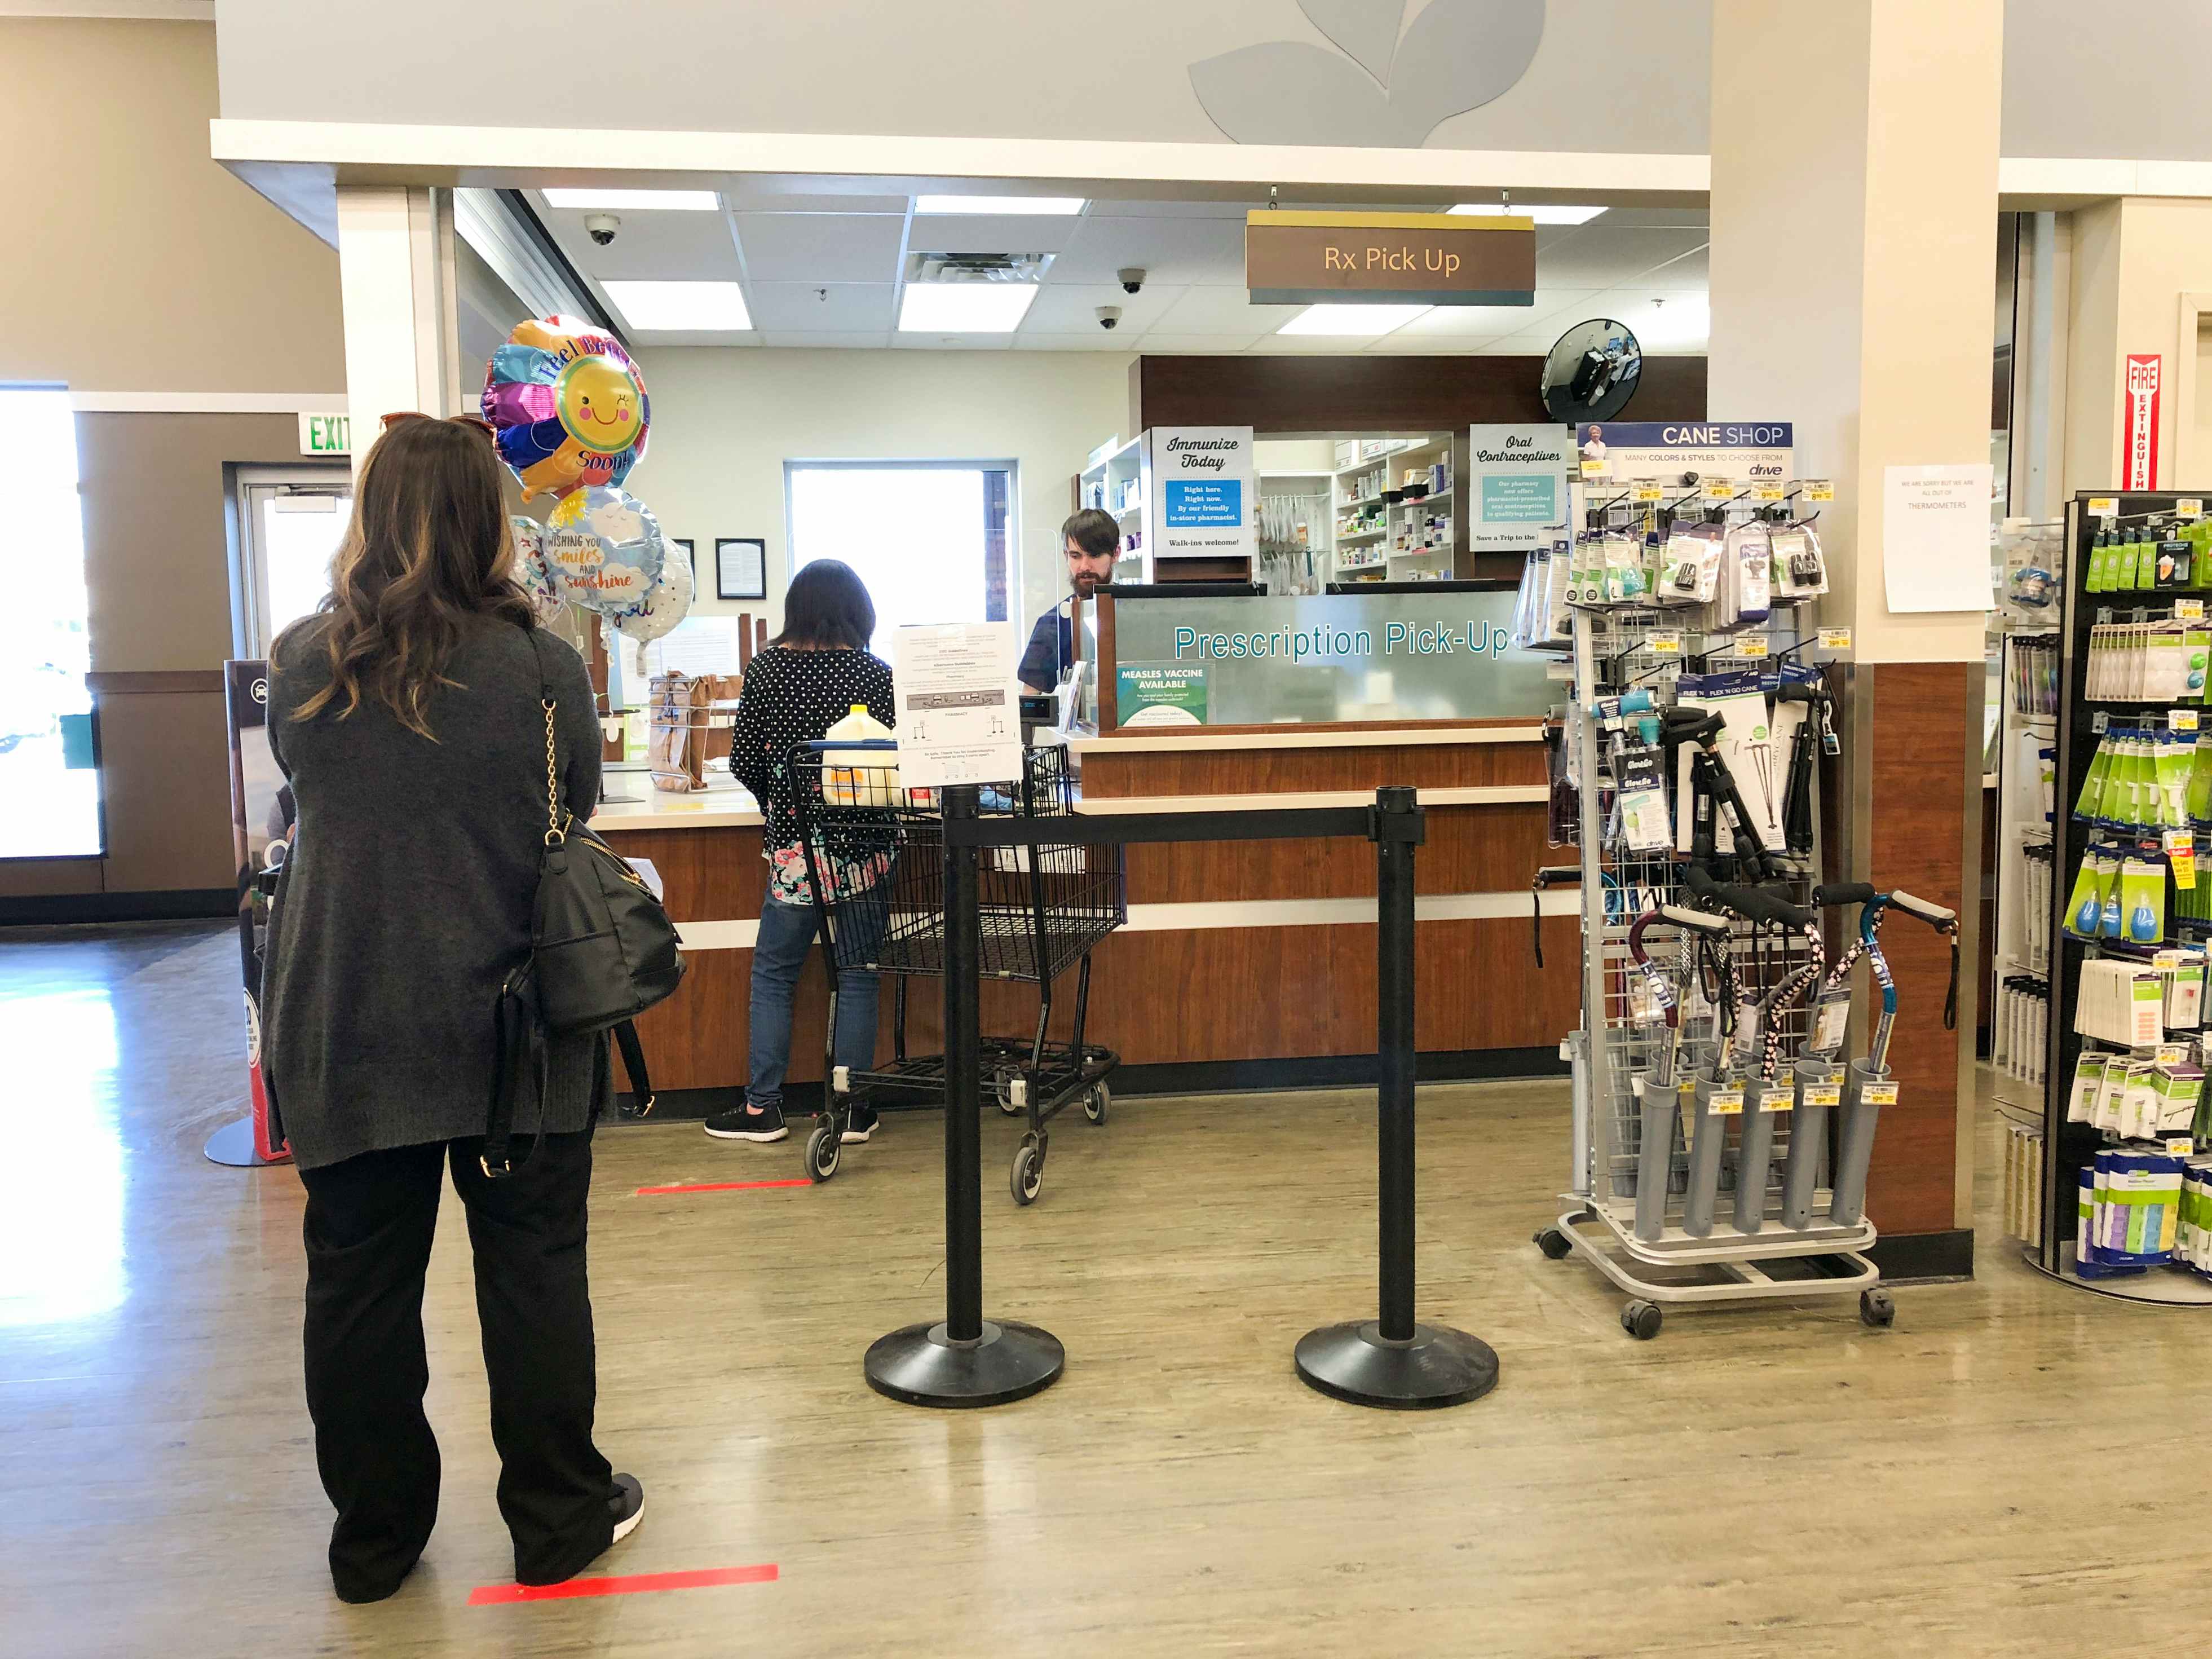 A woman waits in line at the pharmacy at Albertsons.